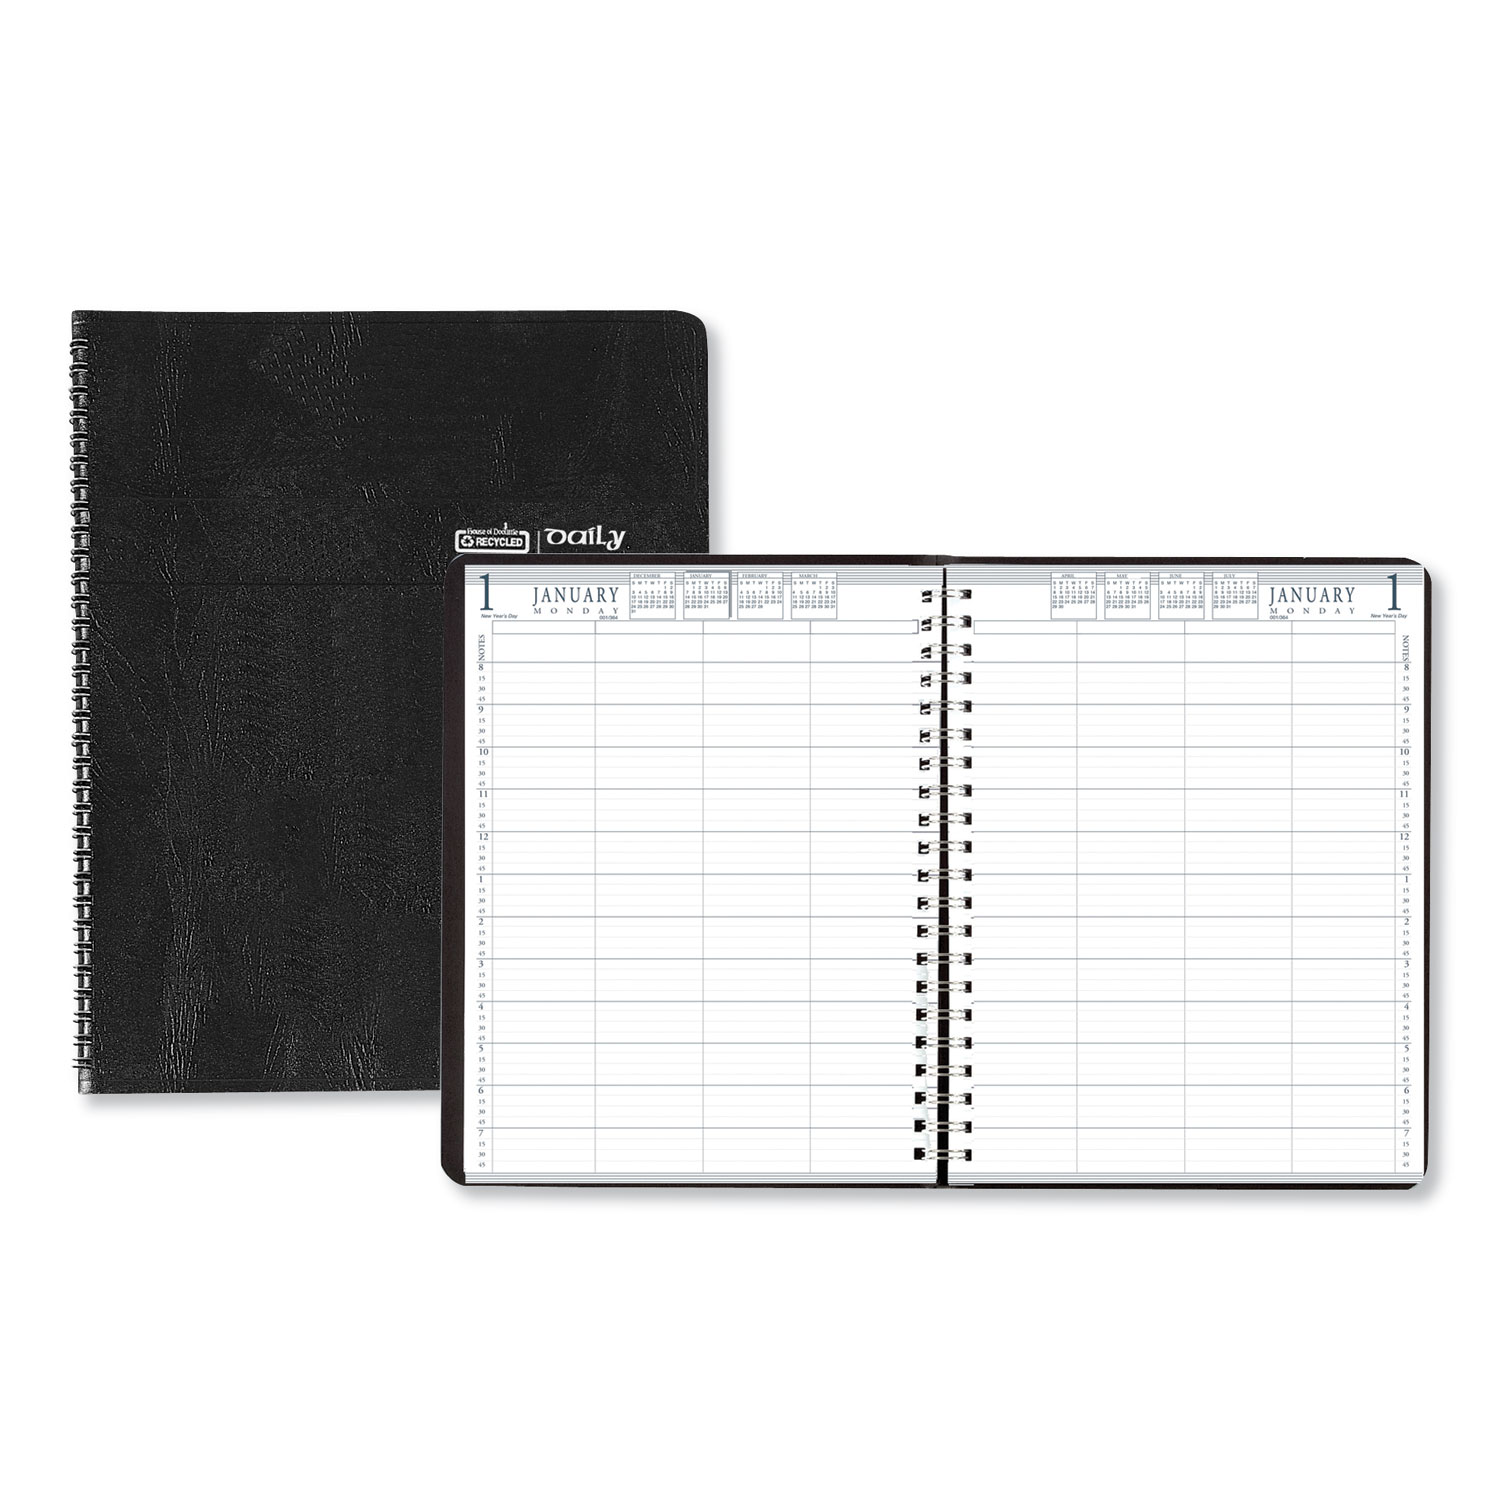  House of Doolittle 281-02 Eight-Person Group Practice Daily Appointment Book, 11 x 8 1/2, Black, 2020 (HOD28102) 